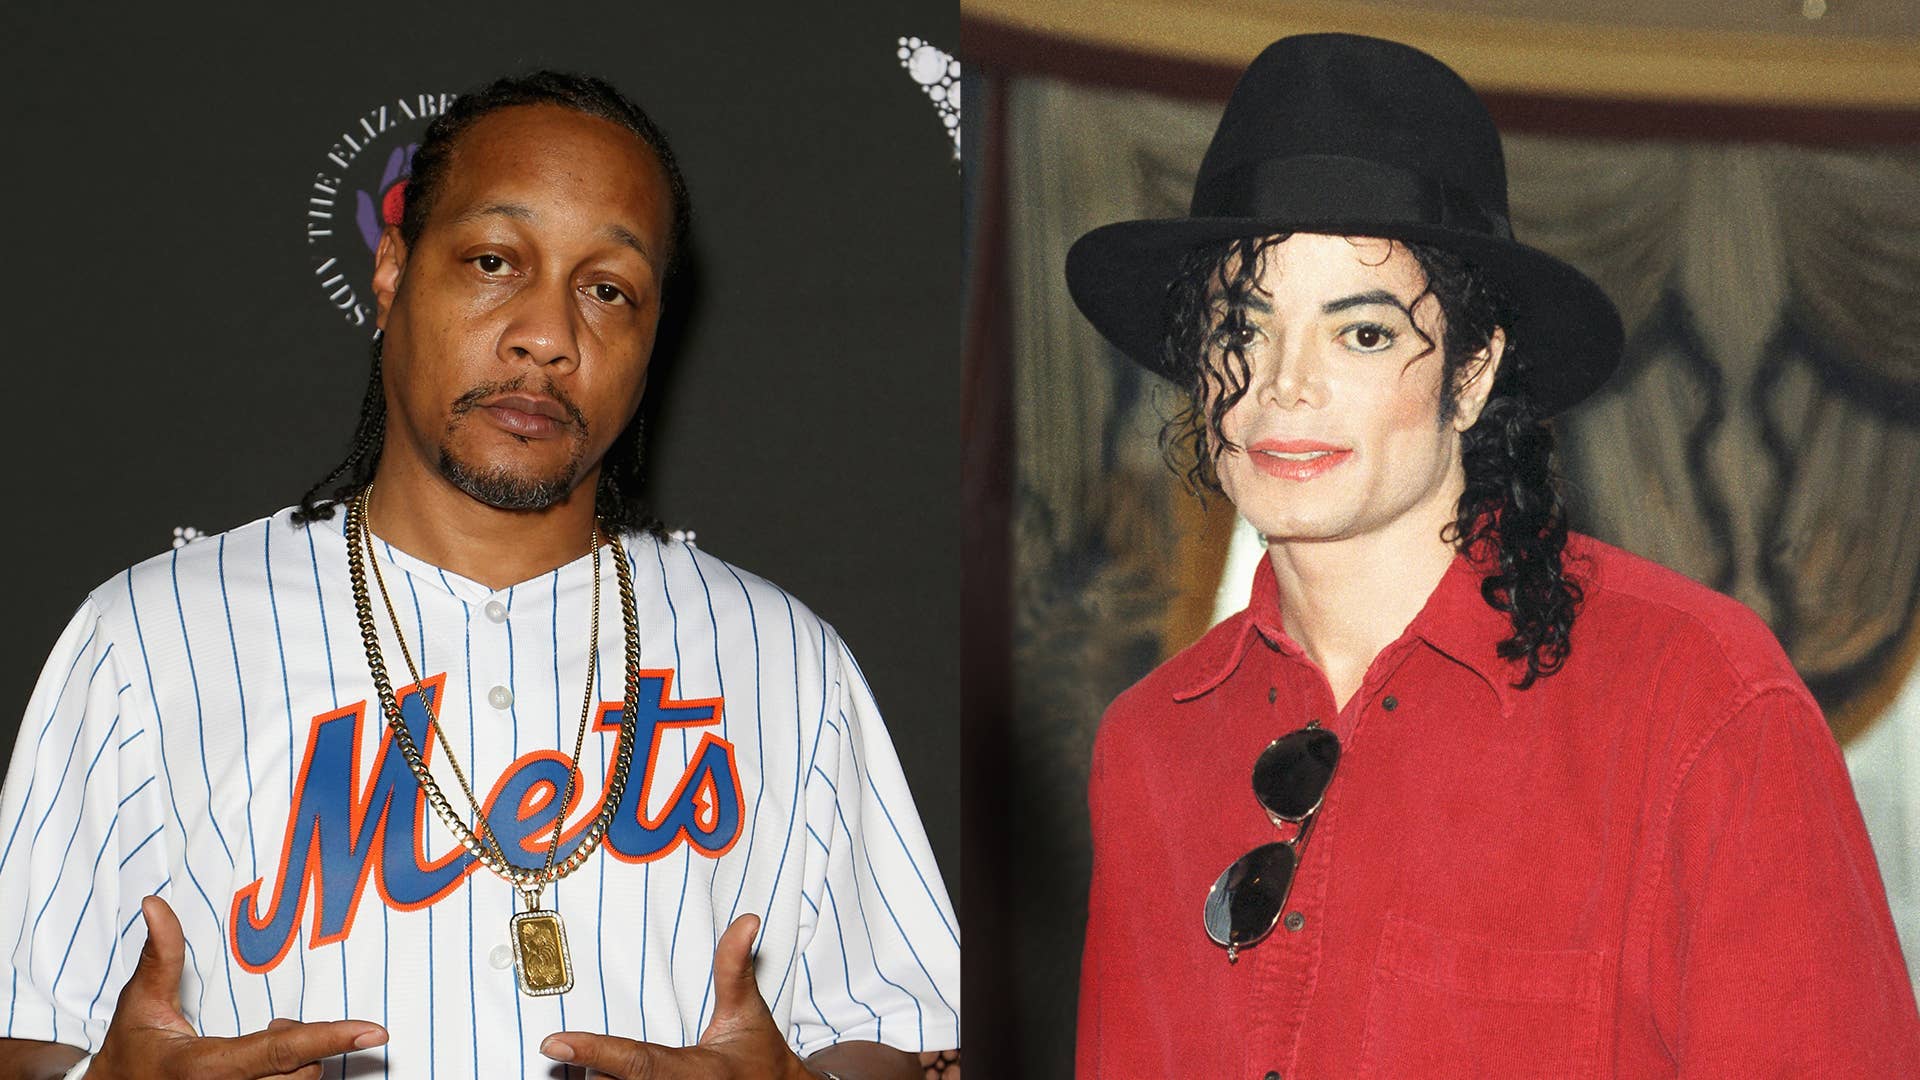 DJ Quik and the late Michael Jackson in a splice image